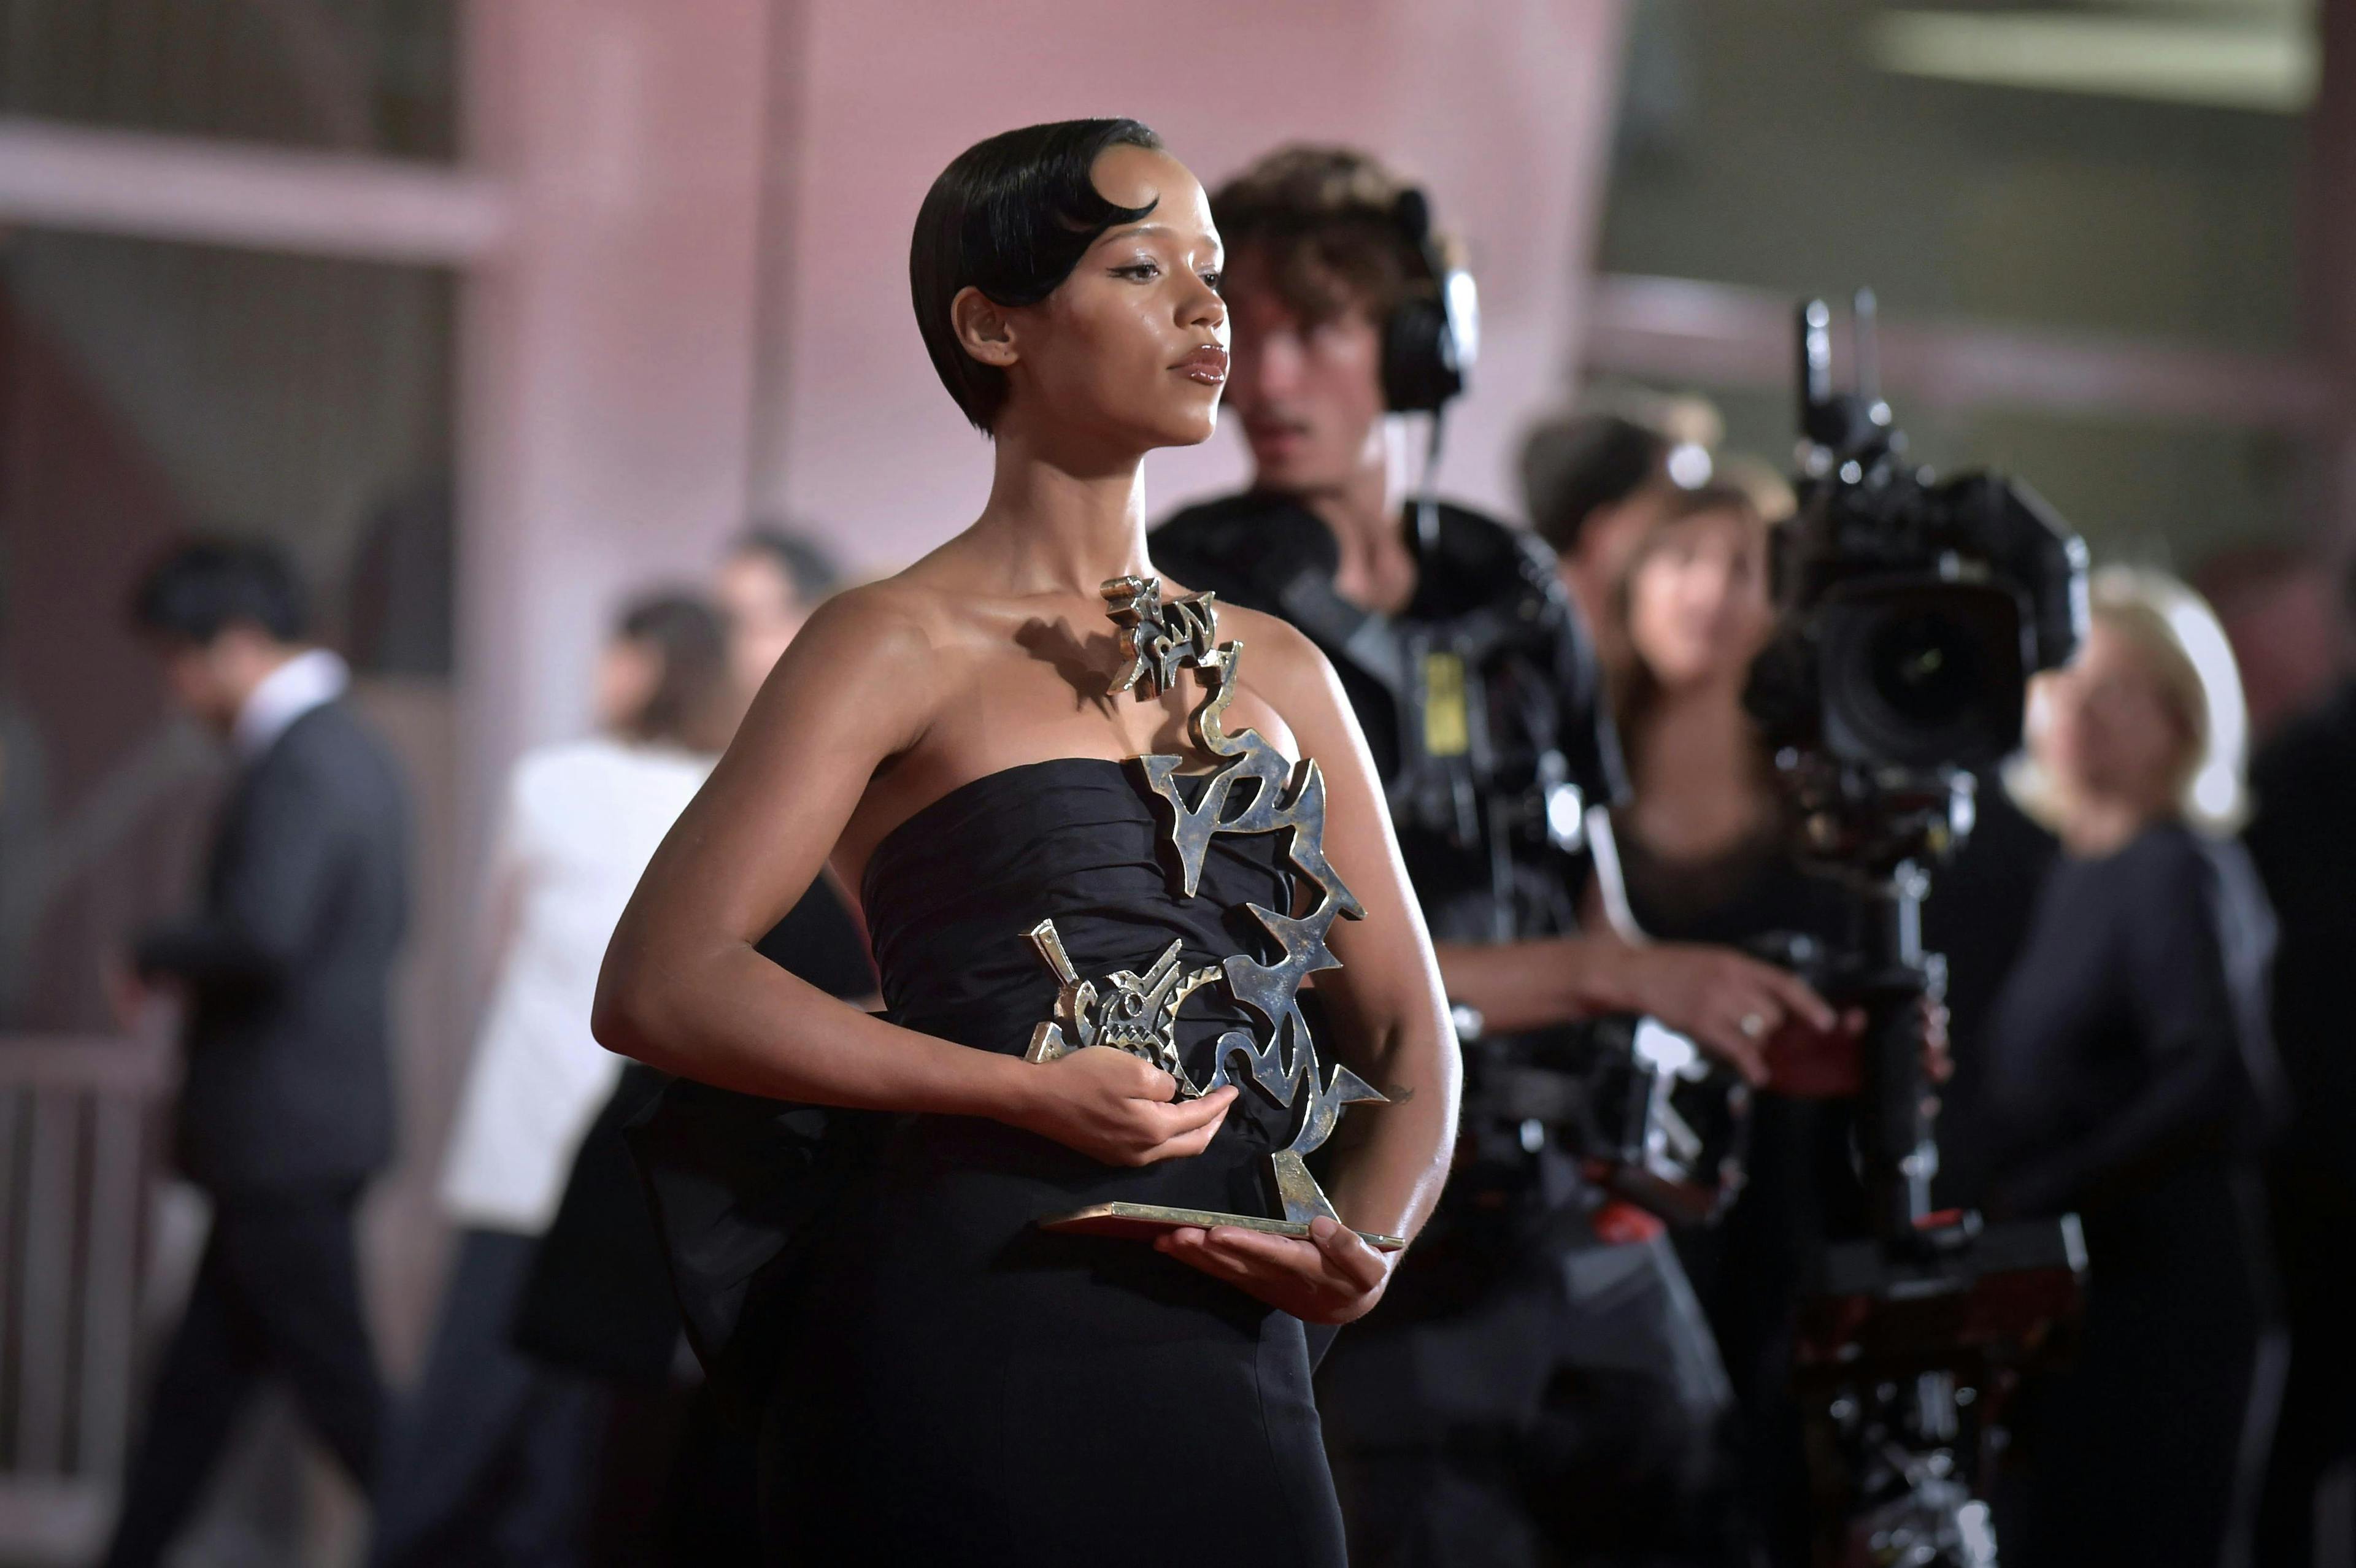 Venice Film Festival 2023; Canadian actress Taylor Russell at the 79th Venice Film Festival after winning the Marcello Mastroianni Award for emerging performers 2022.